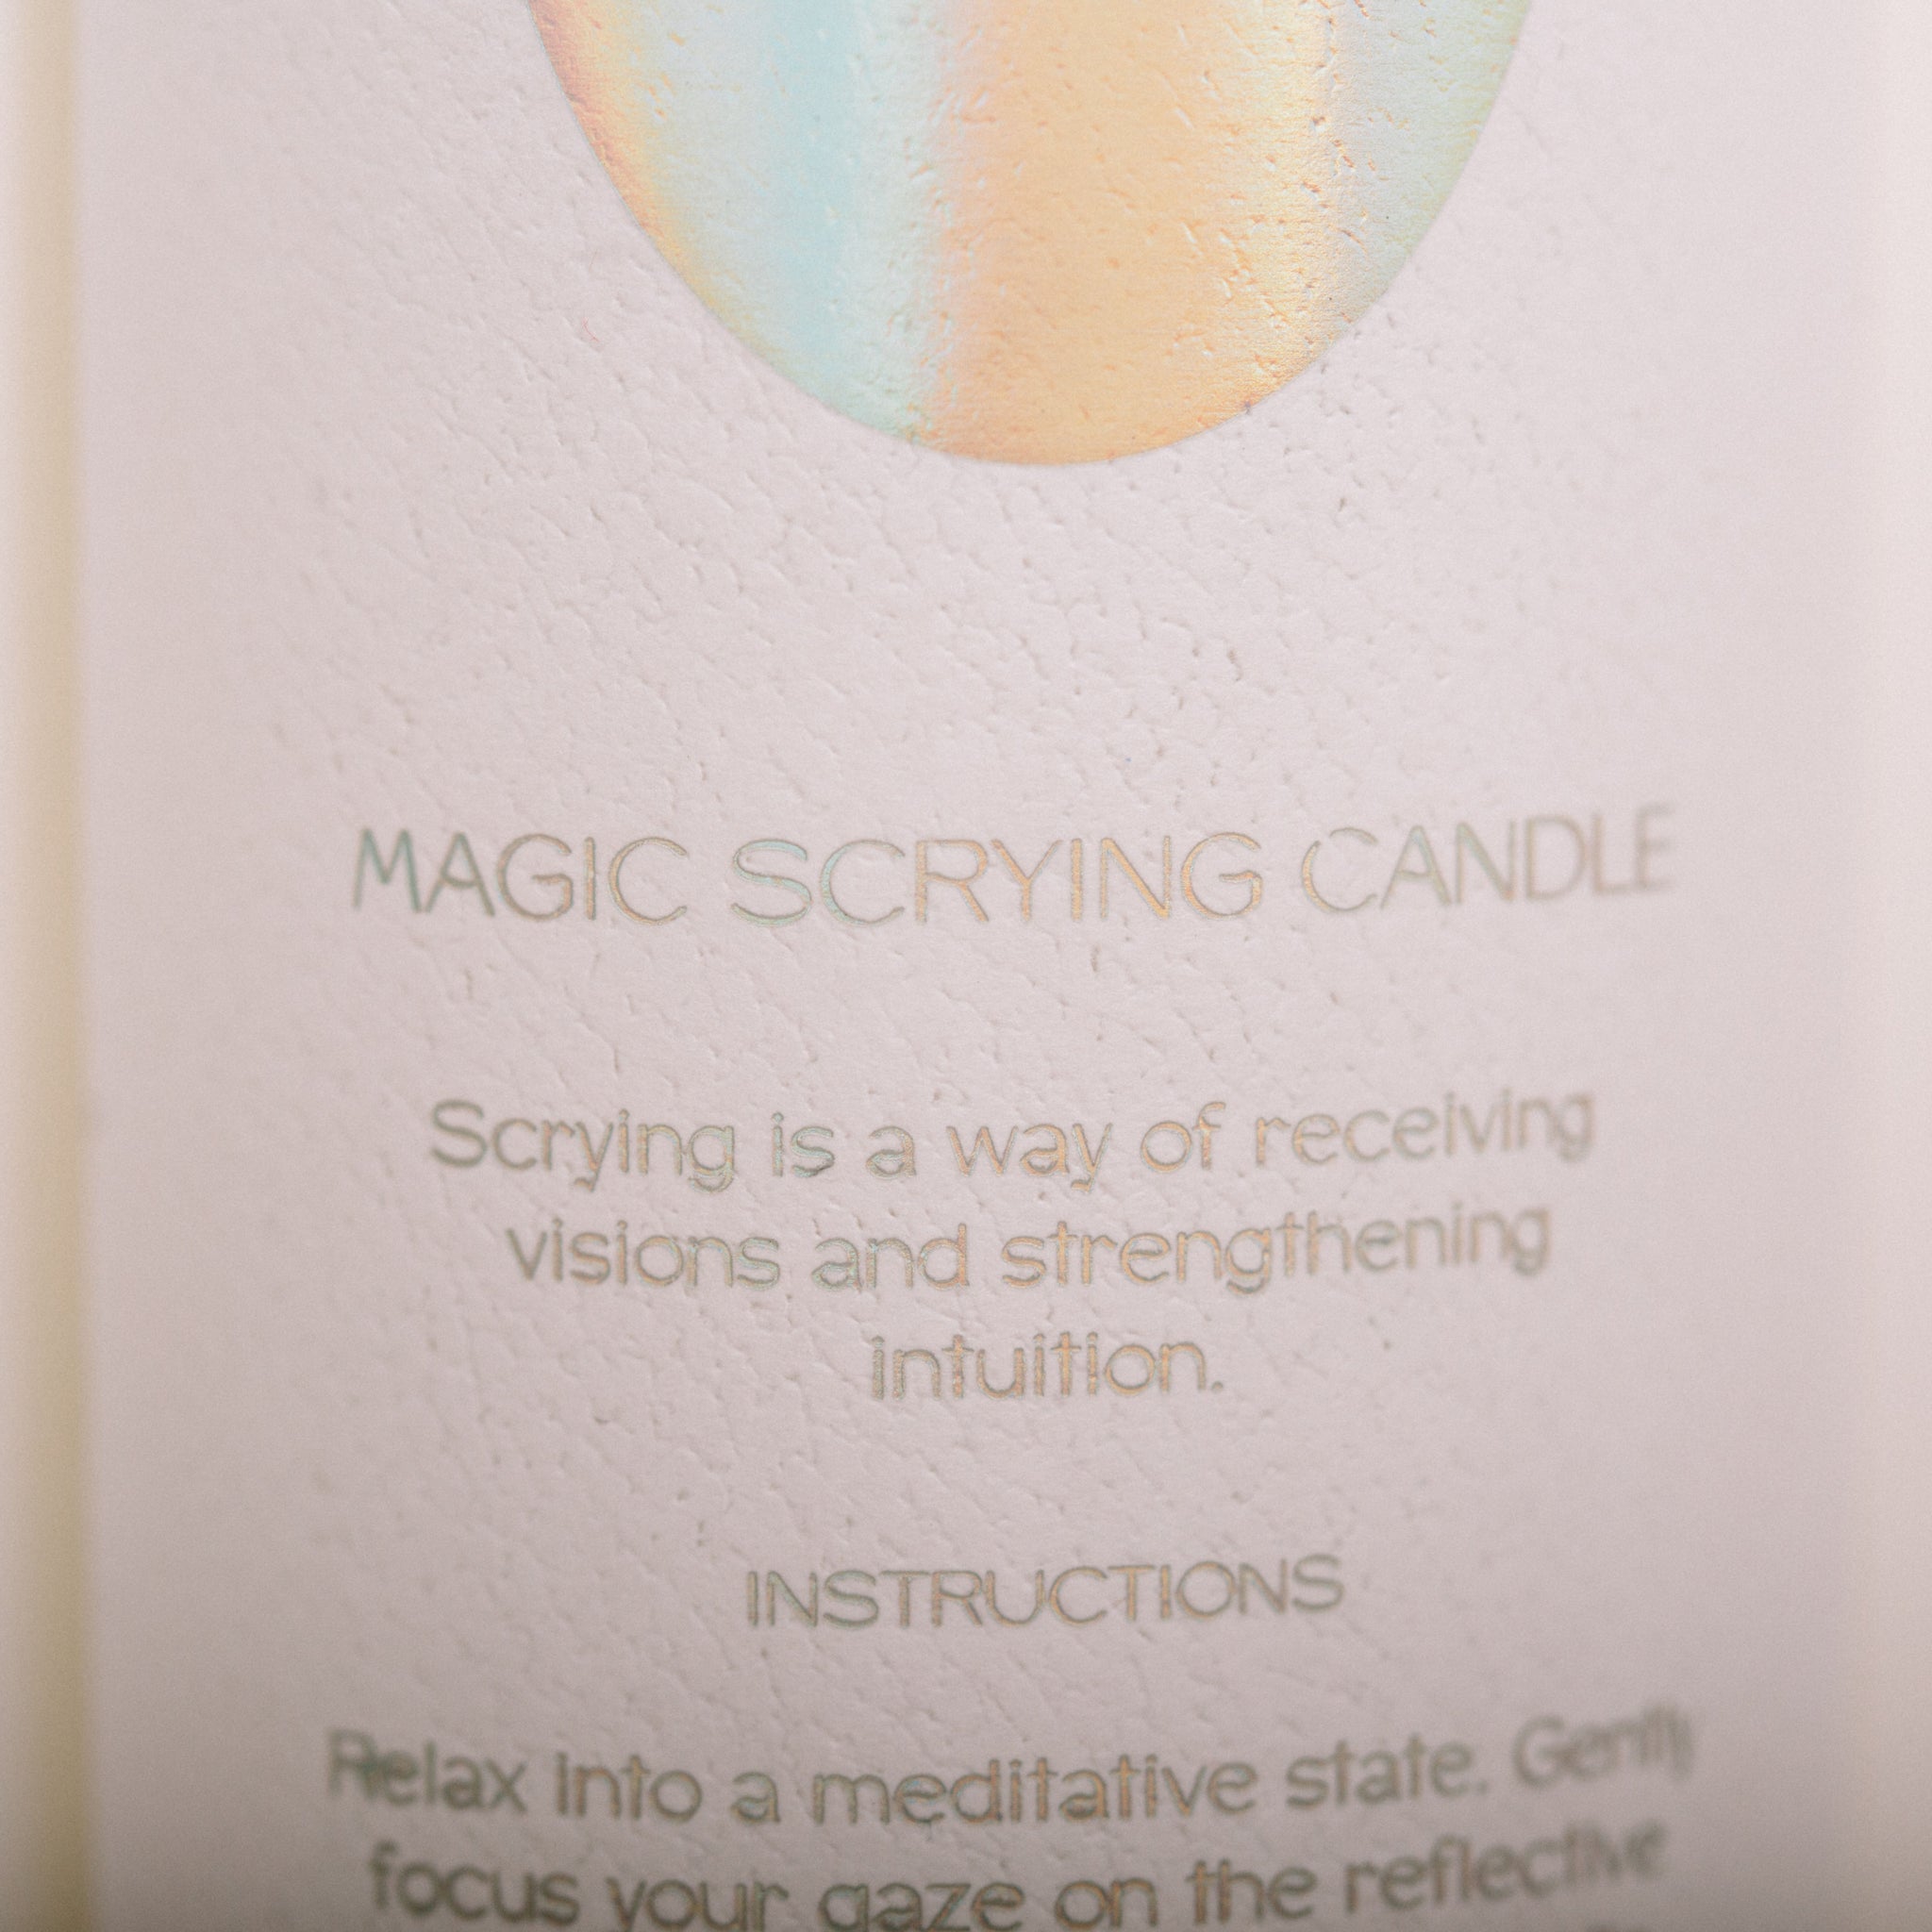 MAGIC SCRYING CANDLE || SPECIES BY THE THOUSANDS